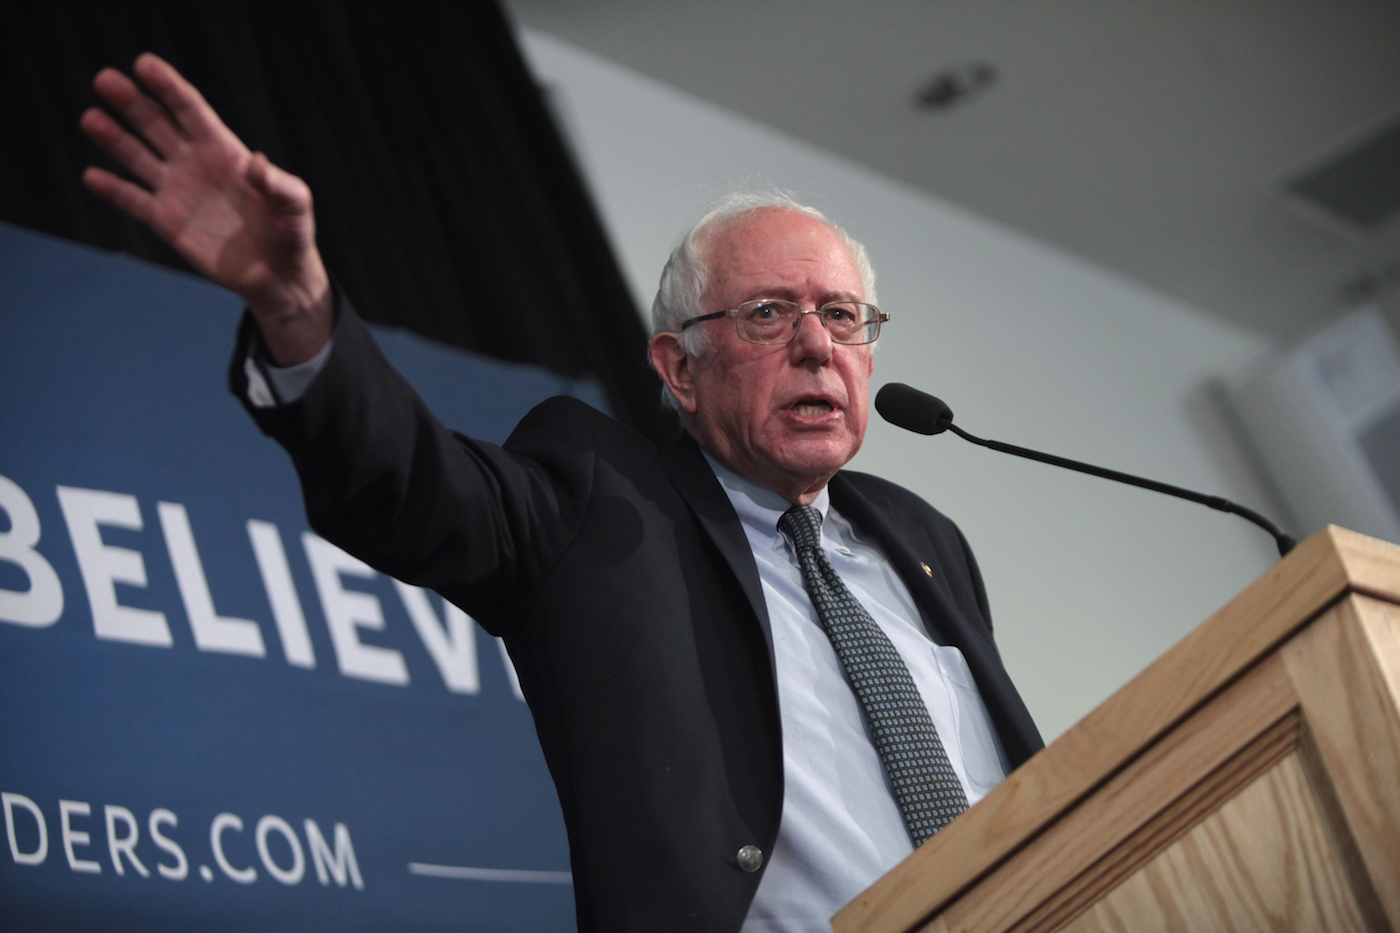 Bernie Sanders speaking at an event in Hooksett, New Hampshire, on January 21, 2016 (photo by Gage Skidmore, via Wikimedia Commons)